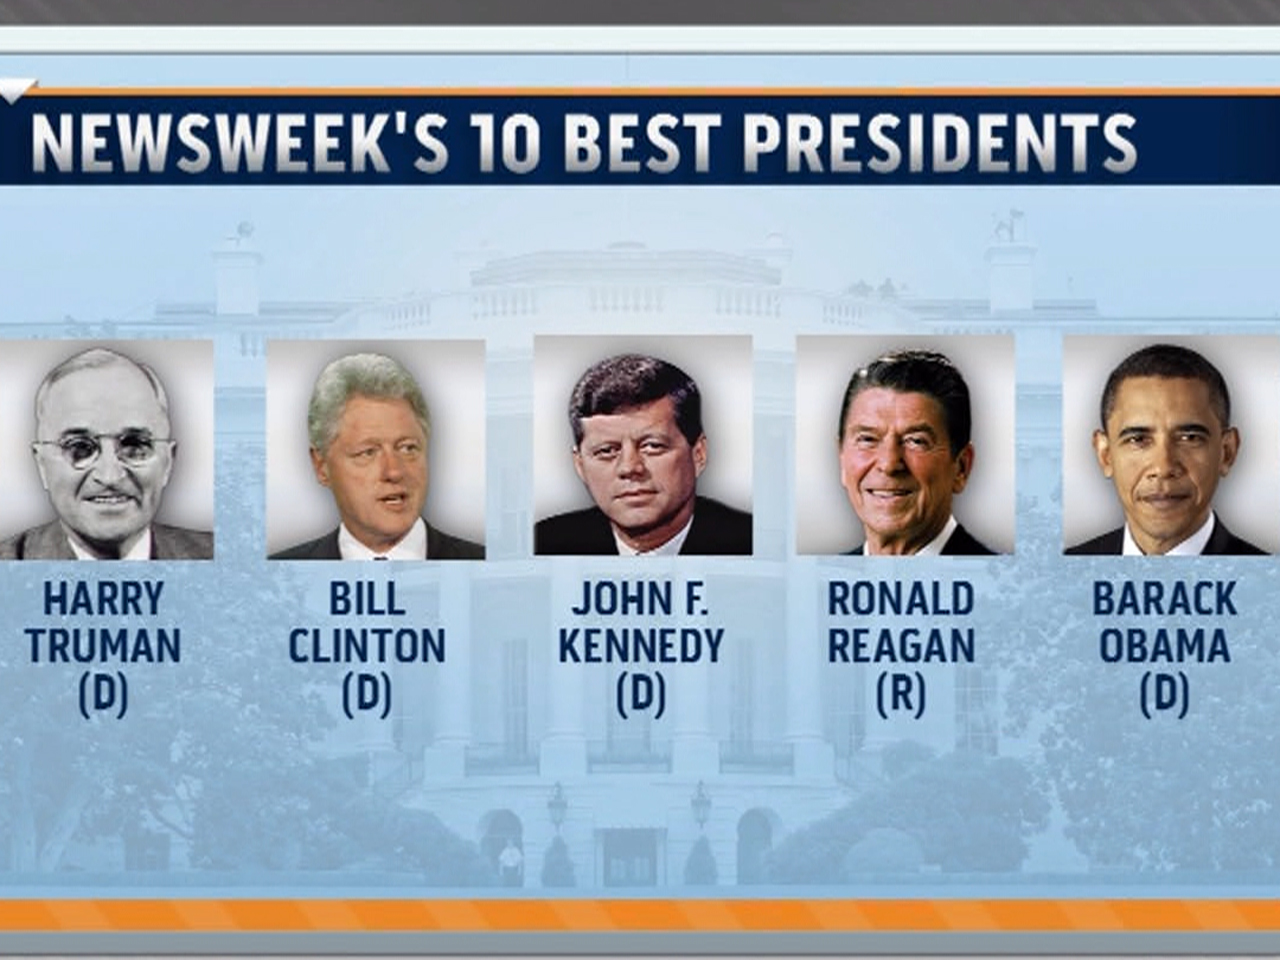 Who the top 10 presidents?